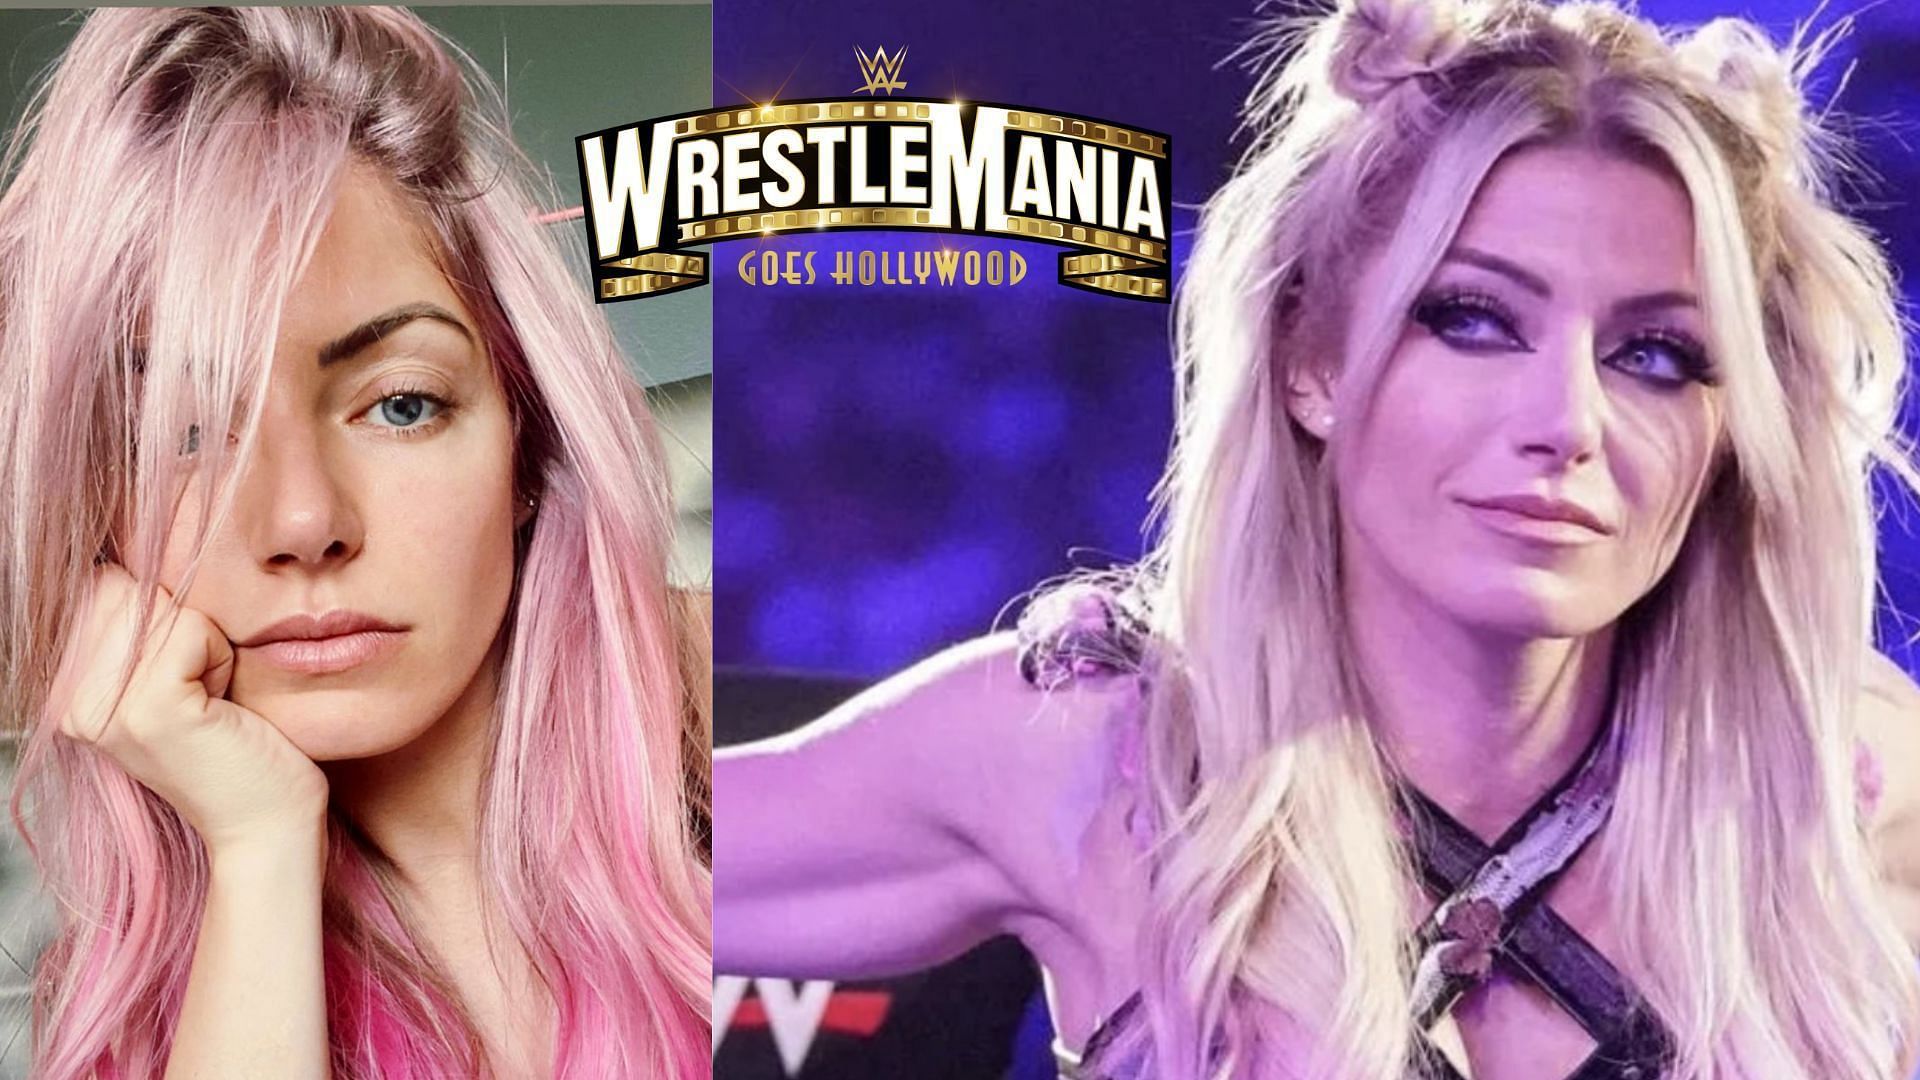 Alexa Bliss is not currently booked for WWE WrestleMania 39.